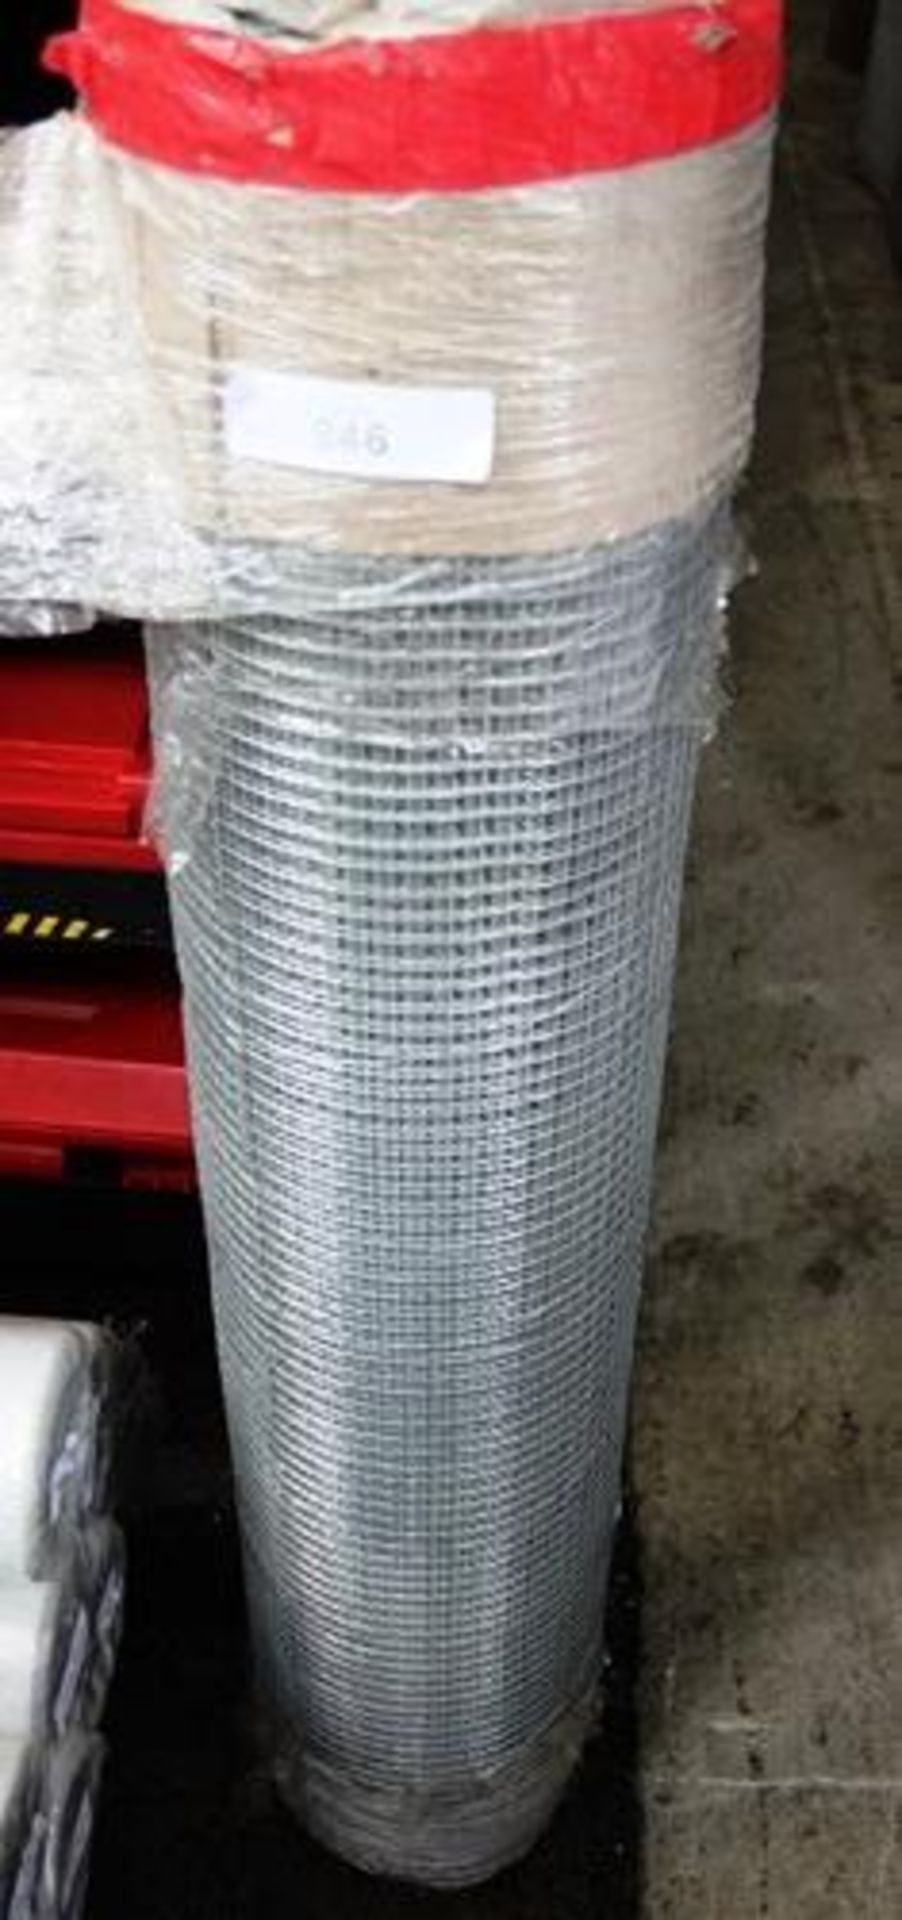 1 x roll of fine wire mesh, size 1.2m wide and 12mm sq - New (long shed)